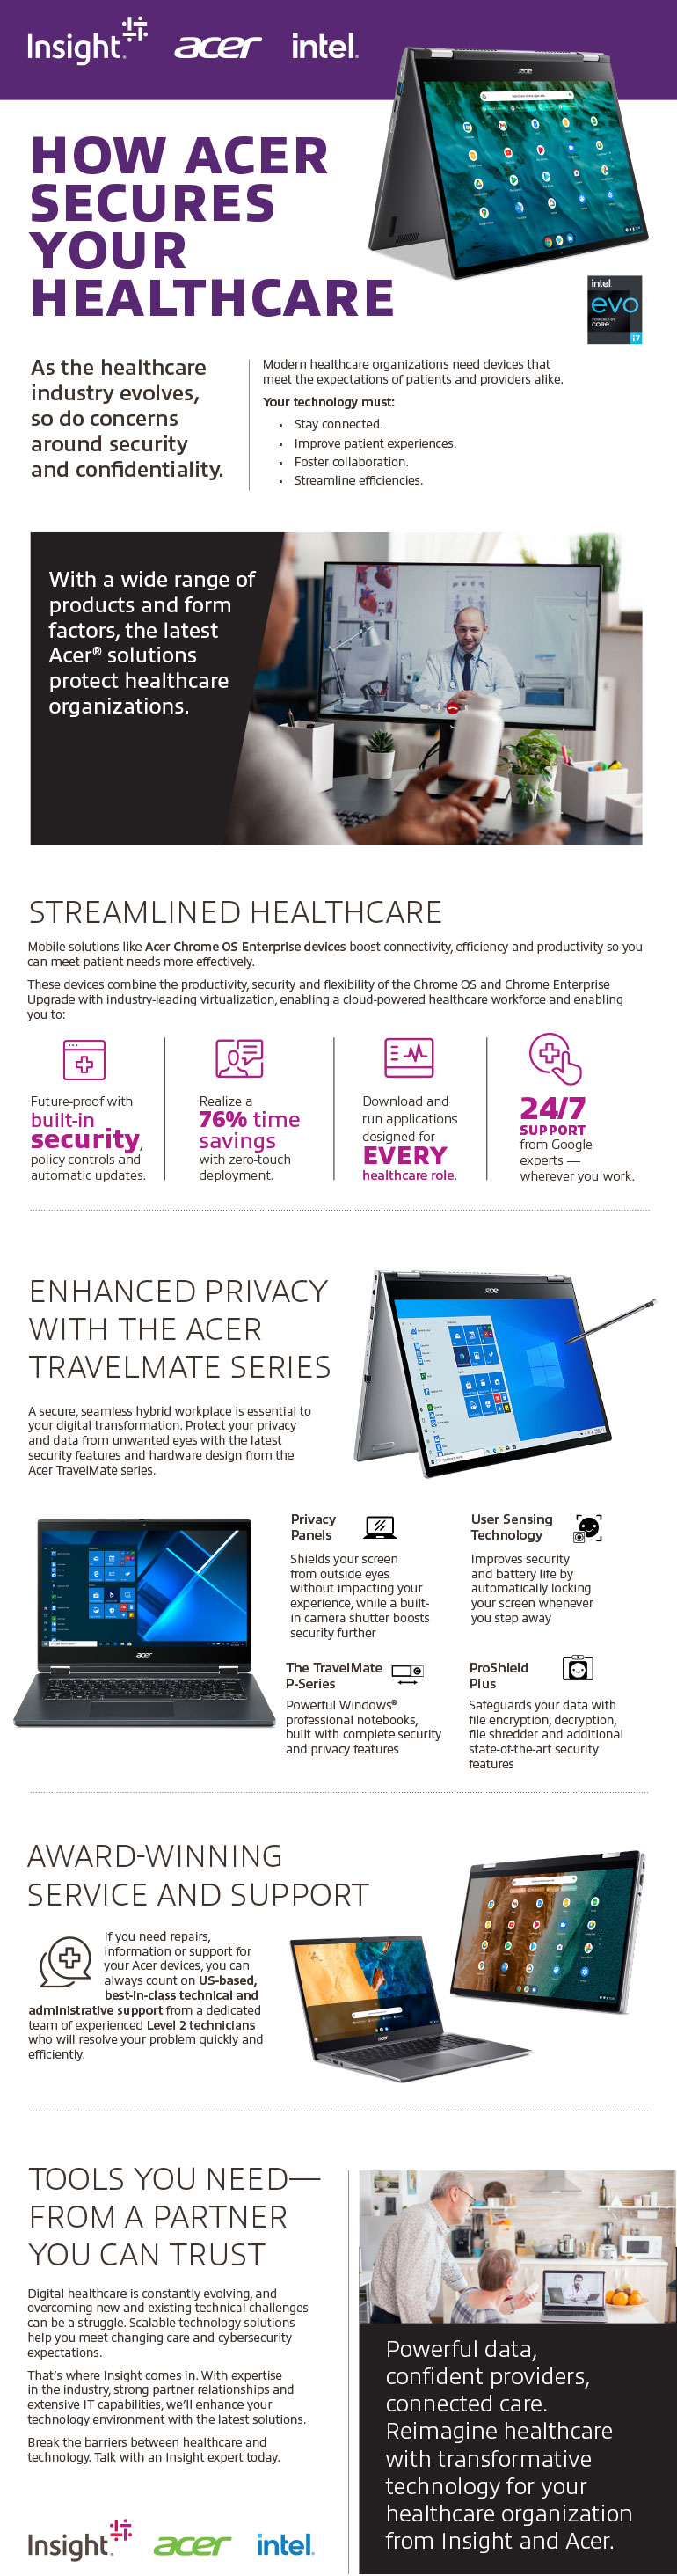 How Acer Secures Your Healthcare infographic transcribed below